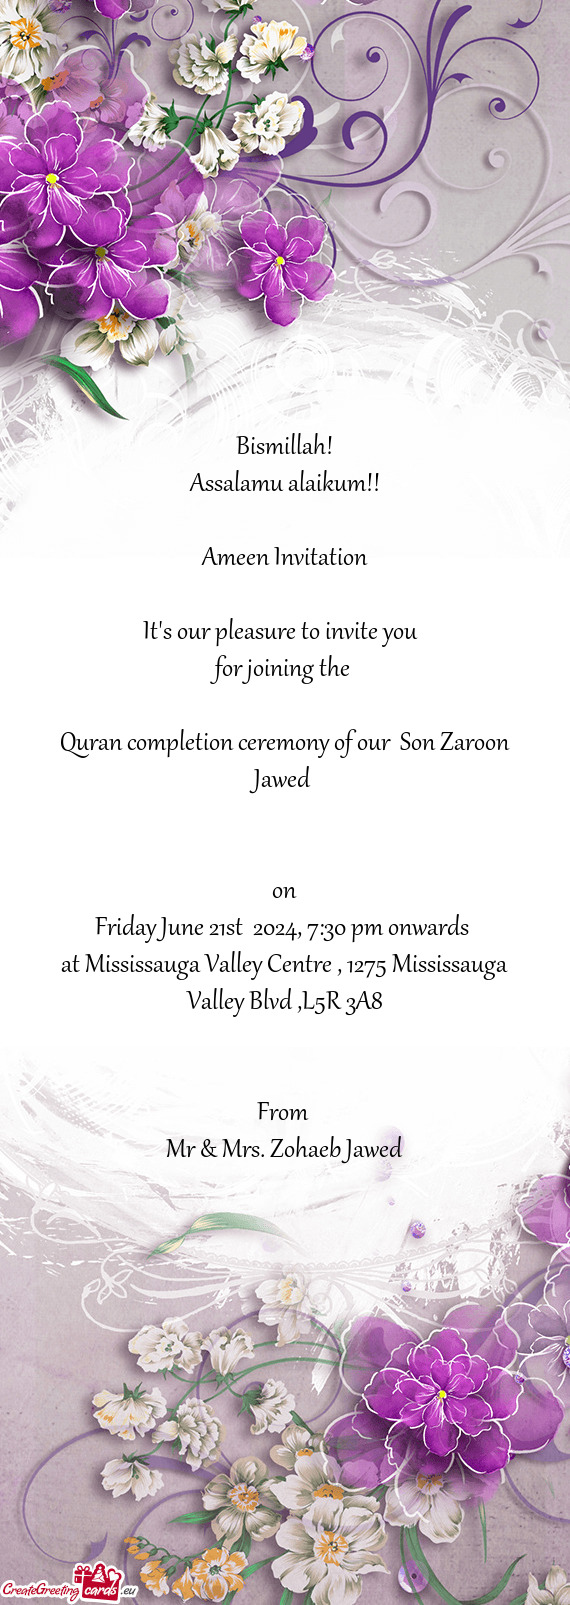 Quran completion ceremony of our Son Zaroon Jawed